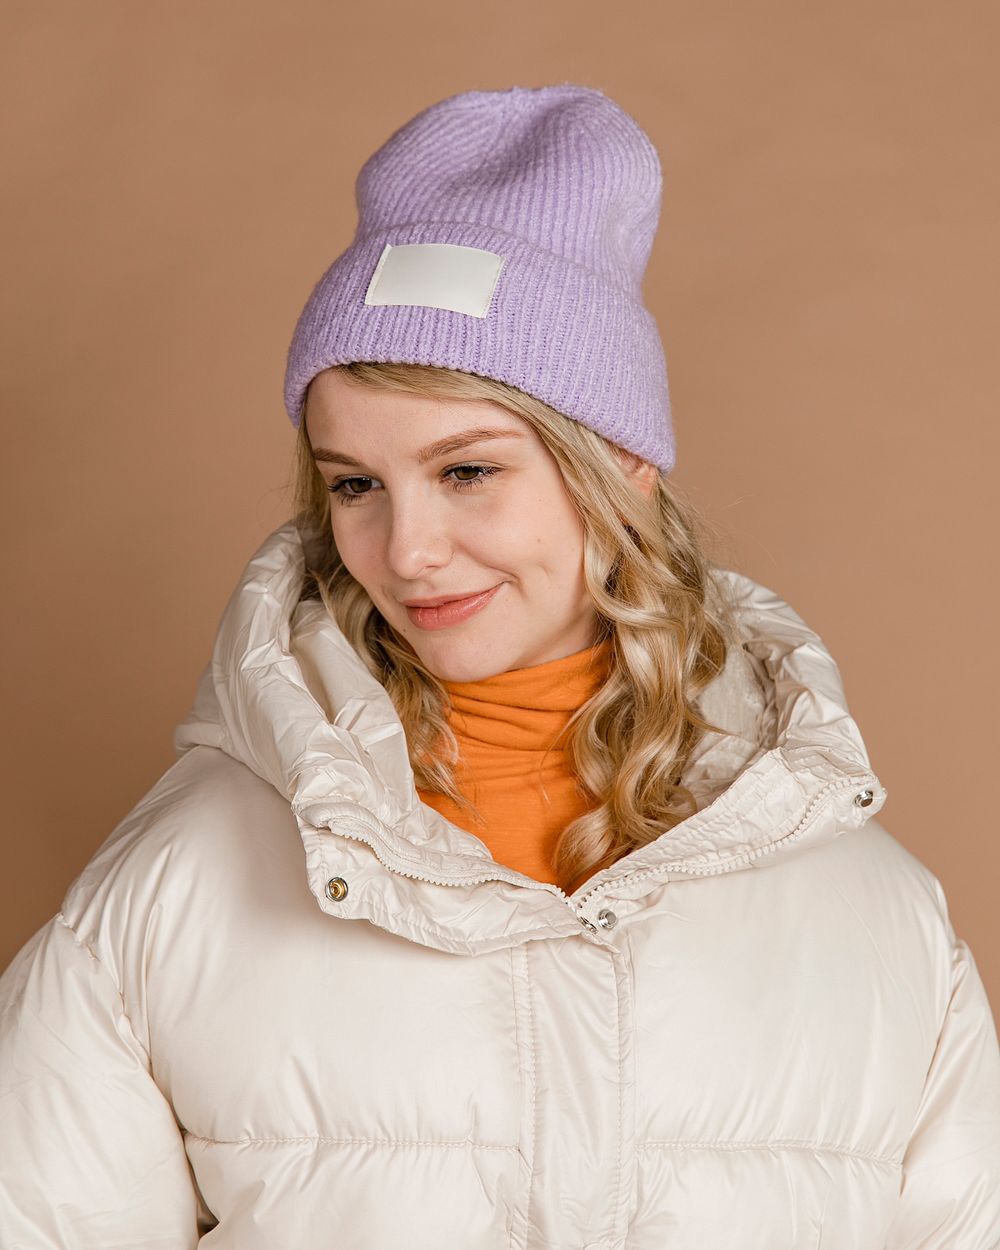 Blonde woman wearing a winter outfit